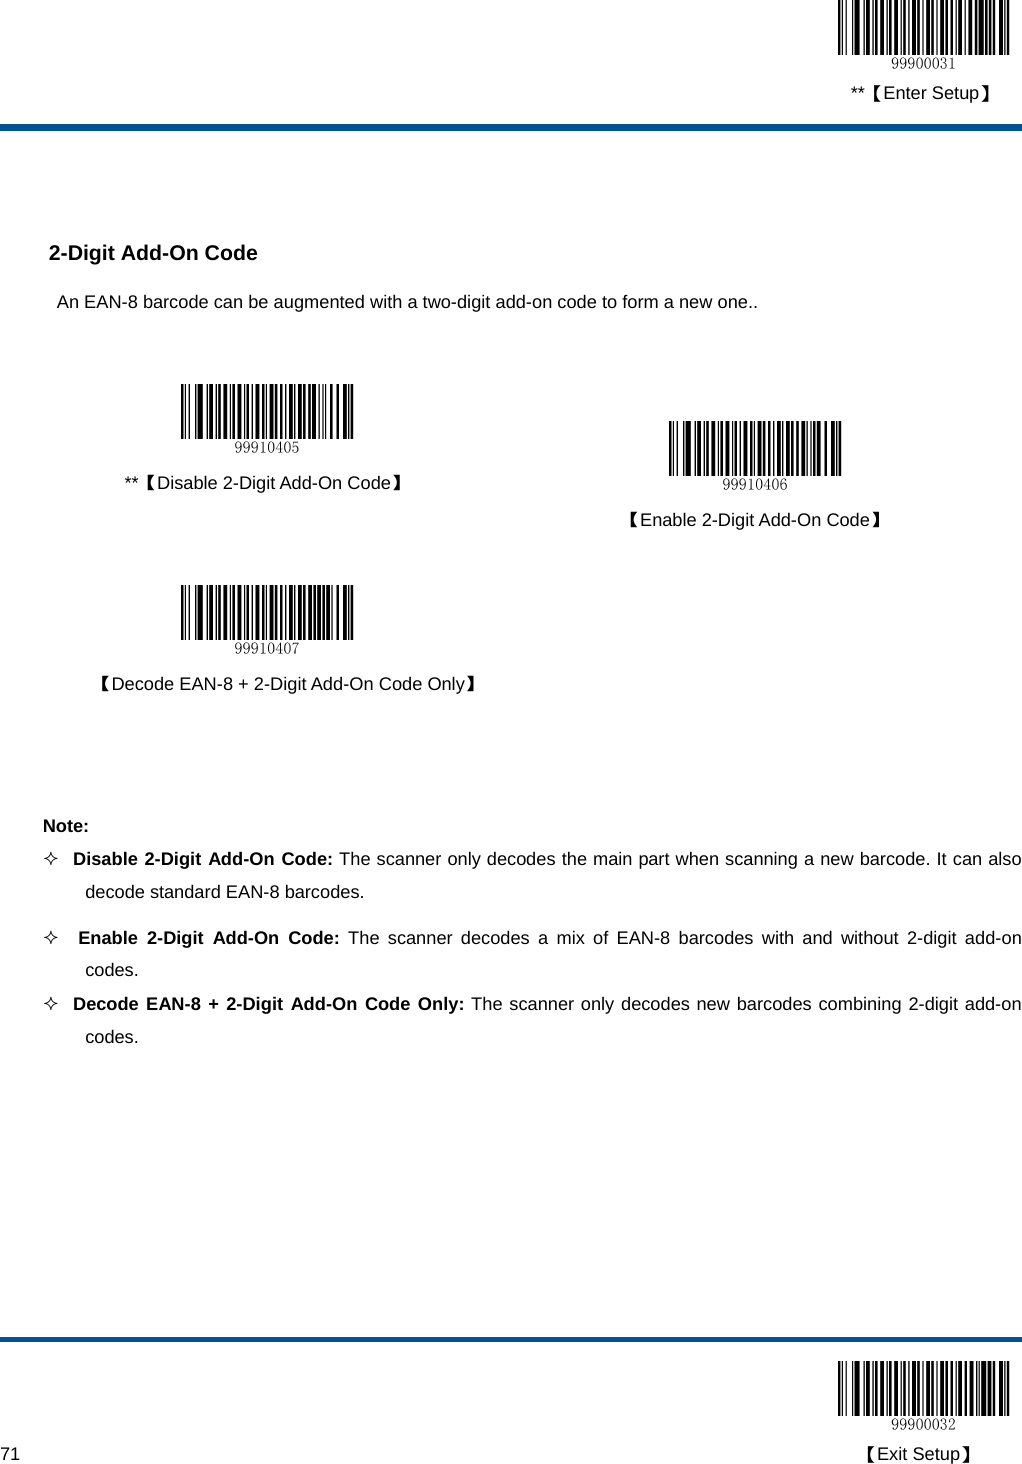  **【Enter Setup】  71                                                                                                                                                                                        【Exit Setup】   2-Digit Add-On Code An EAN-8 barcode can be augmented with a two-digit add-on code to form a new one..    **【Disable 2-Digit Add-On Code】   【Enable 2-Digit Add-On Code】     【Decode EAN-8 + 2-Digit Add-On Code Only】    Note:  Disable 2-Digit Add-On Code: The scanner only decodes the main part when scanning a new barcode. It can also decode standard EAN-8 barcodes.   Enable 2-Digit Add-On Code: The scanner decodes a mix of EAN-8 barcodes with and without 2-digit add-on codes.  Decode EAN-8 + 2-Digit Add-On Code Only: The scanner only decodes new barcodes combining 2-digit add-on codes.  